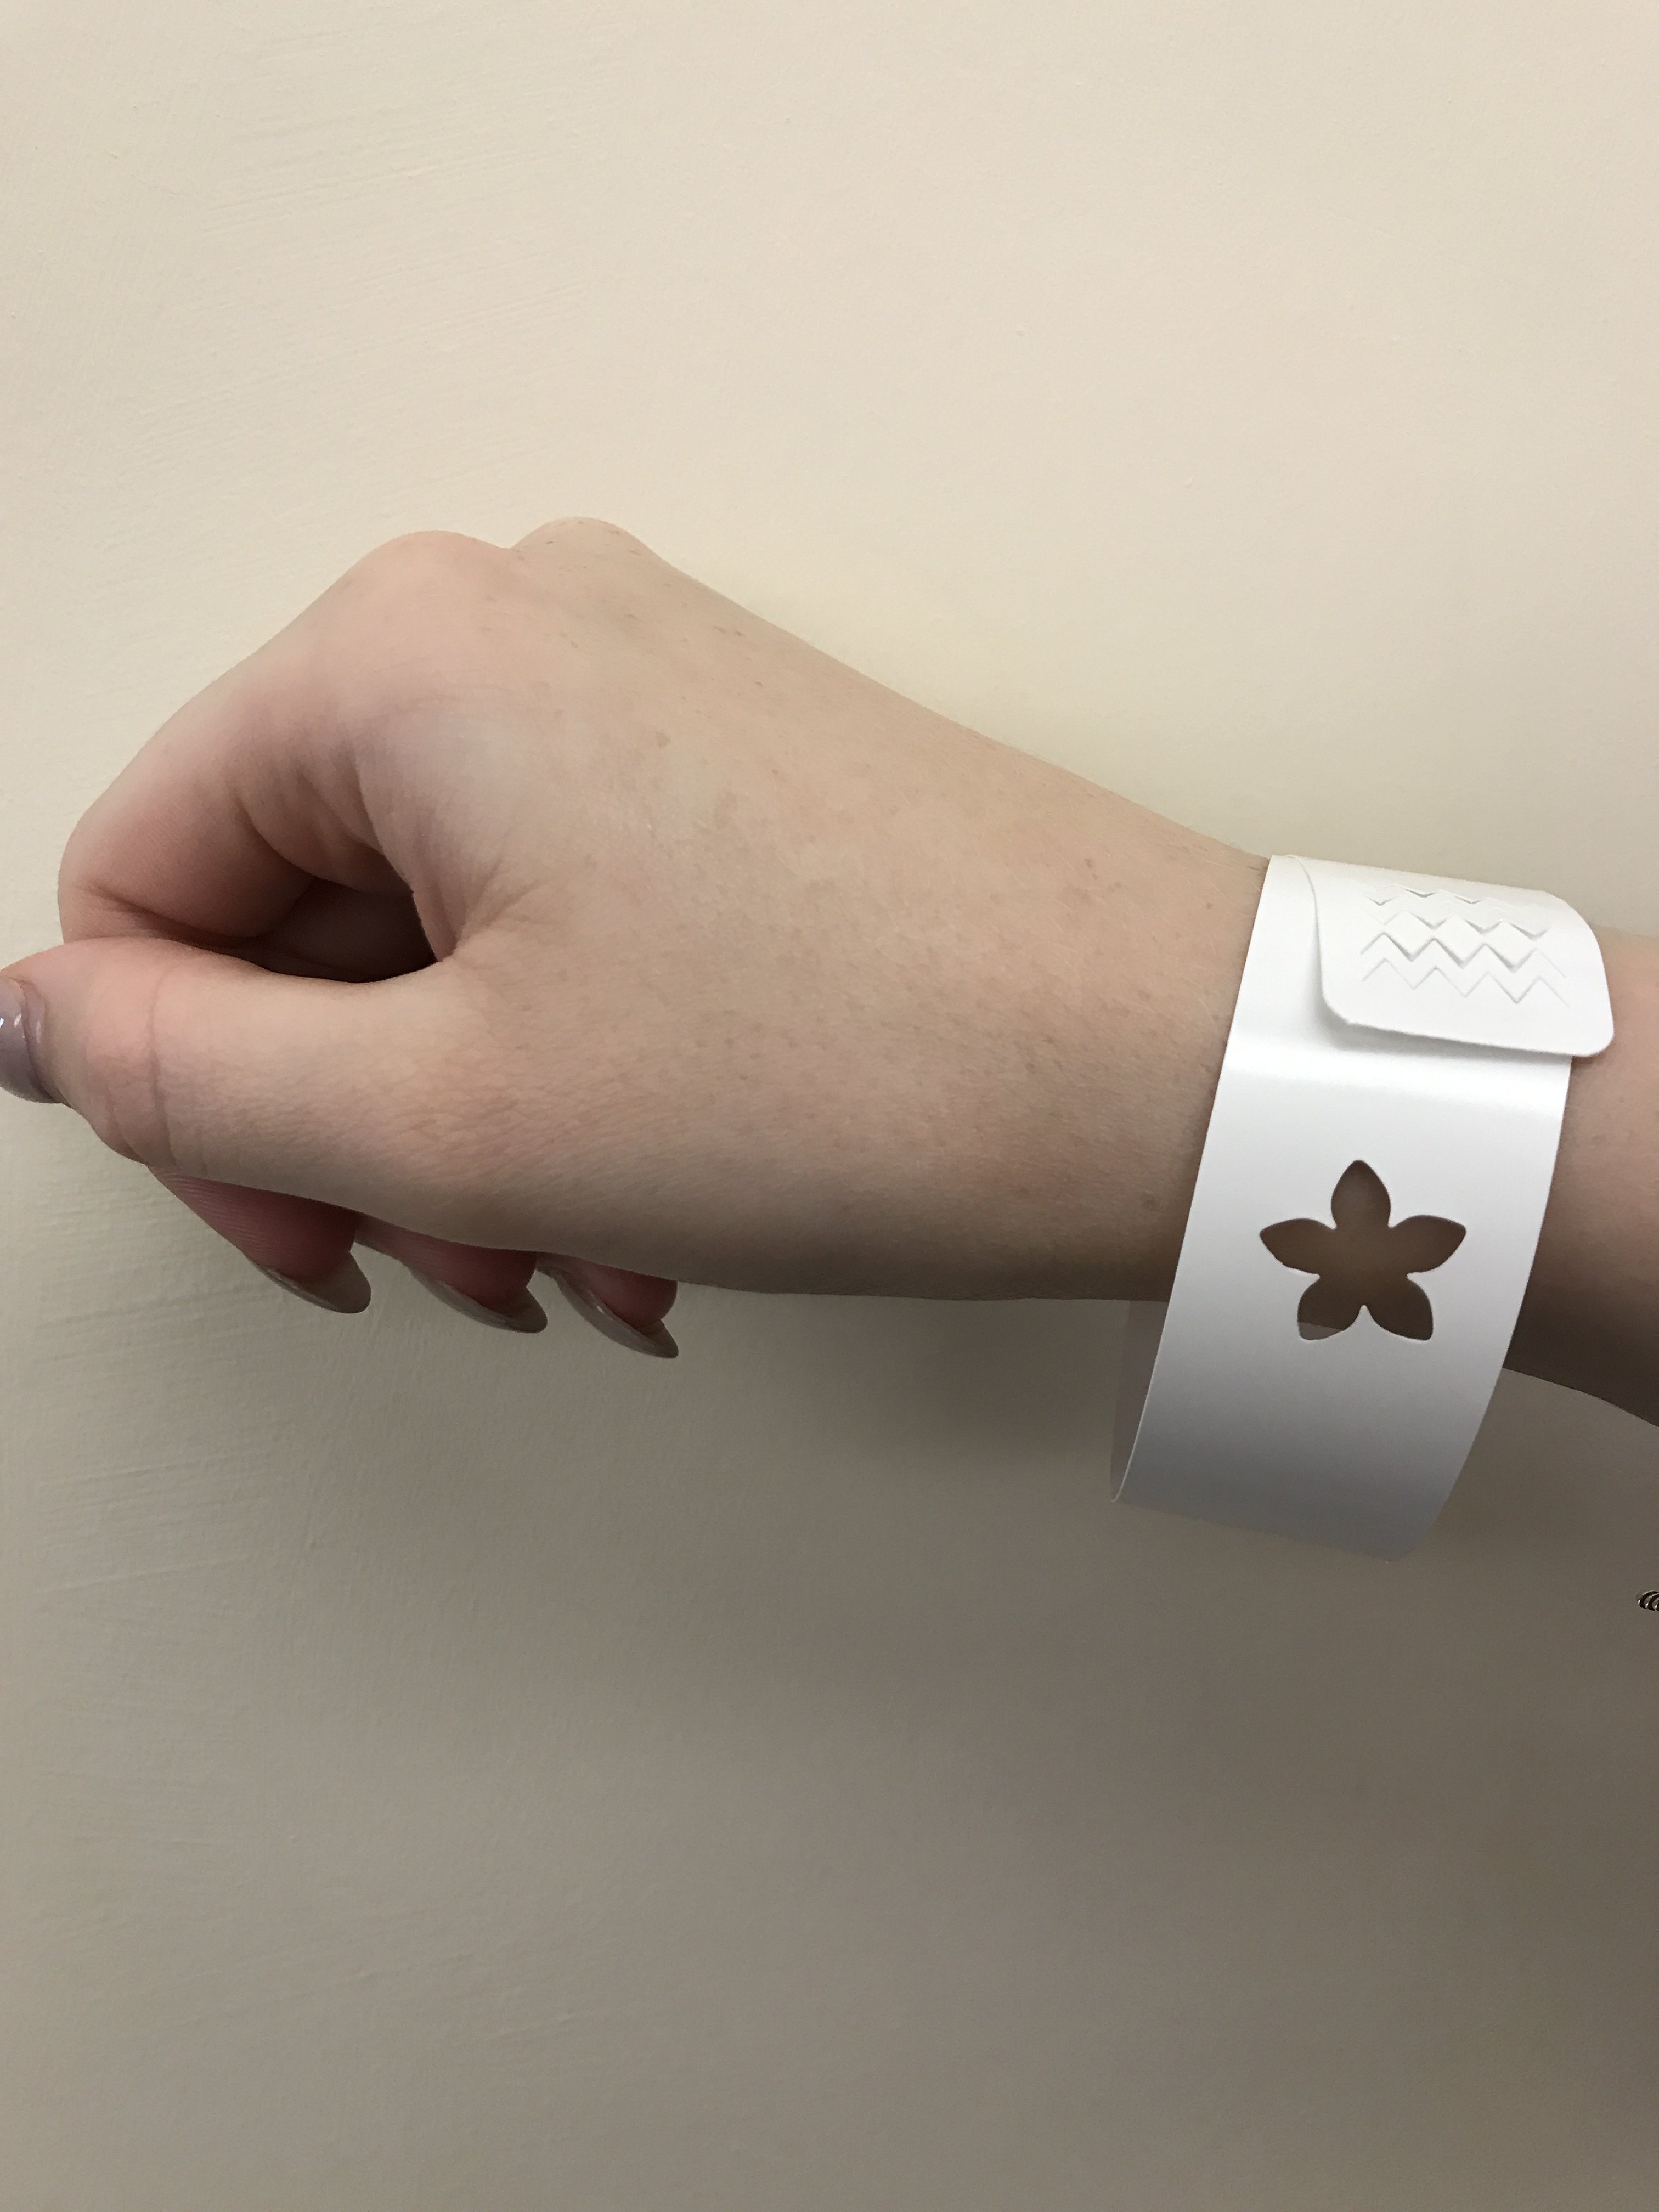 Our Healthcare Assistant has created a dementia patient wristband that will be nationally trialled featured image